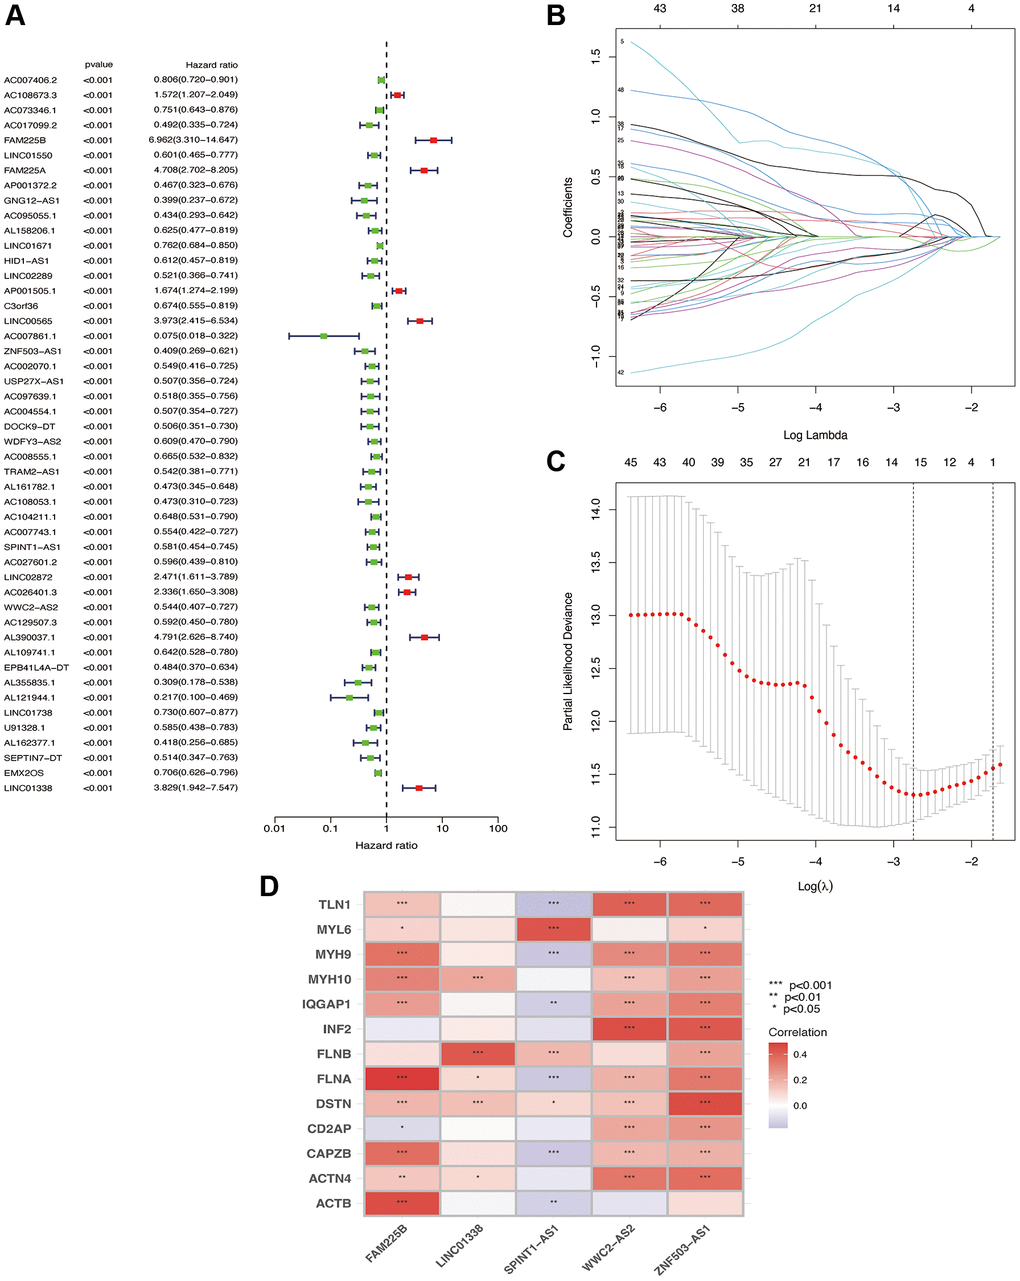 Screening of lncRNA for independent prognosis. One-way Cox regression analysis (A); Lasso regression analysis (B); λ values (C); correlation heat map (D).